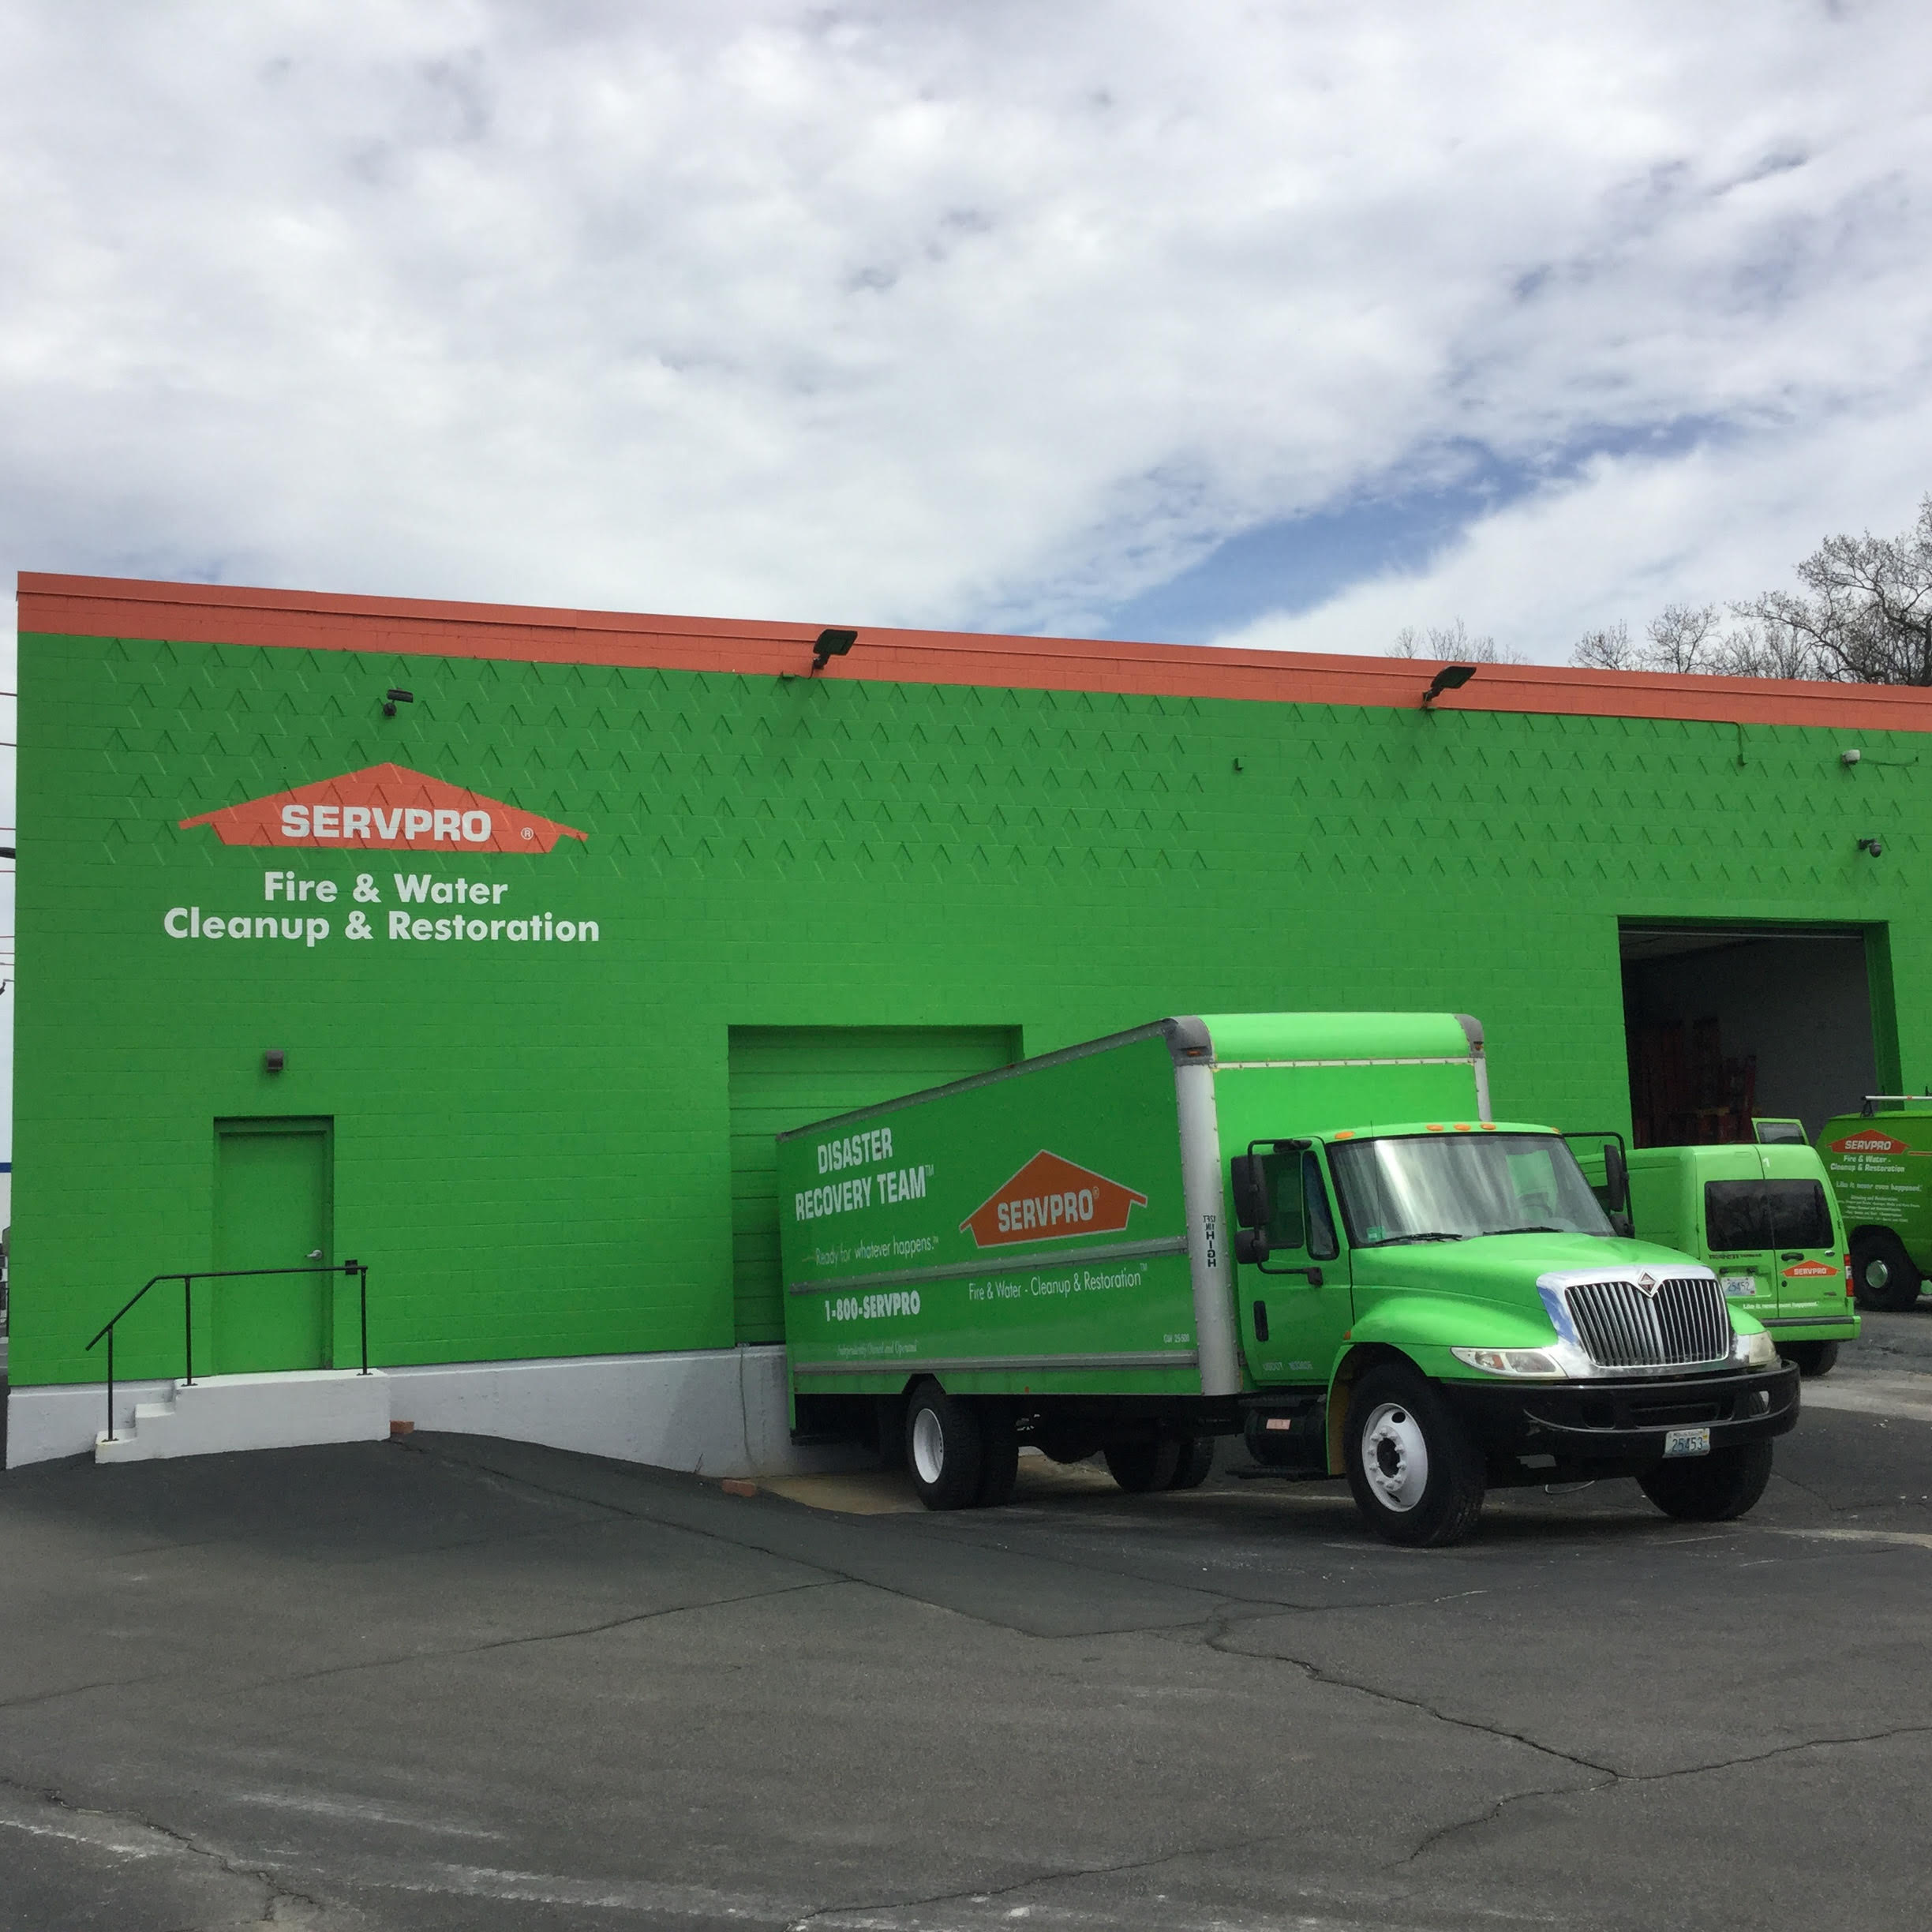 It's a great day at the SERVPRO office!